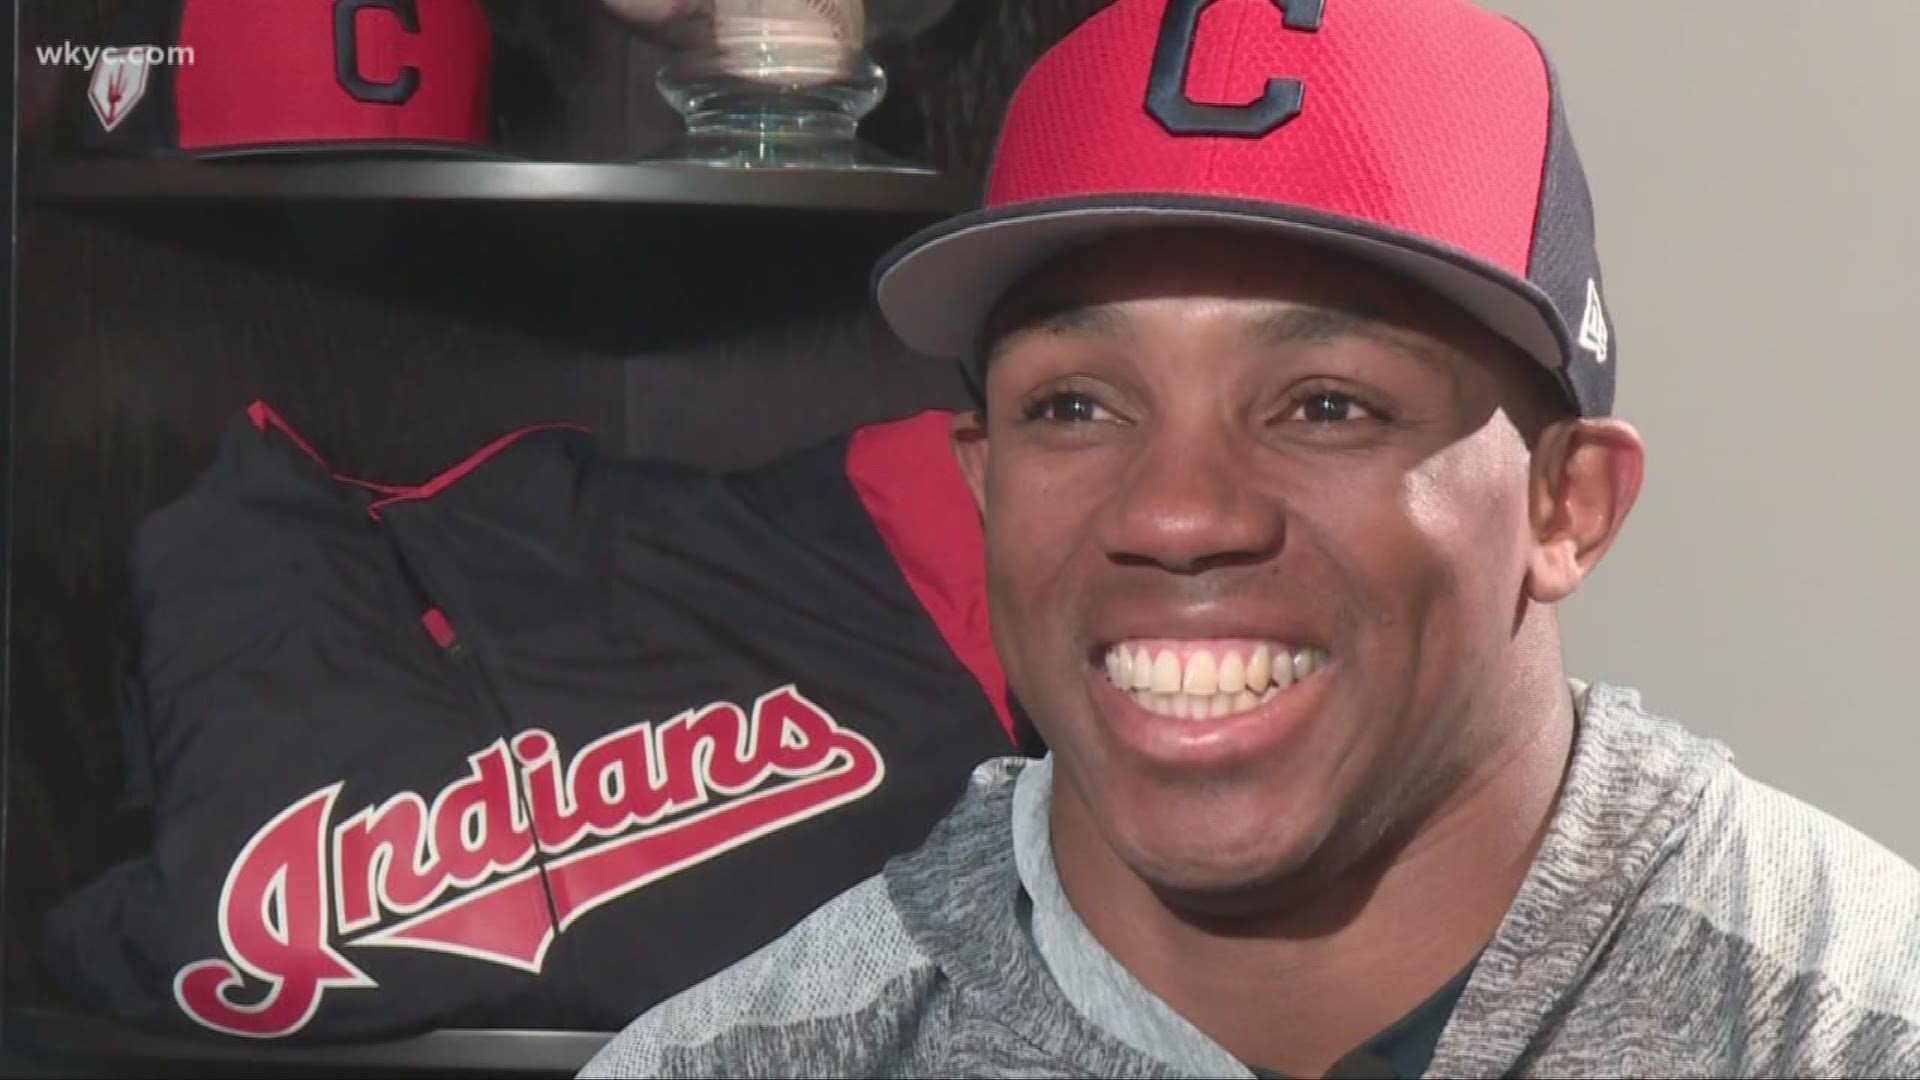 July 29, 2019: We sat down for an in-depth conversation with Cleveland Indians outfielder Greg Allen -- and he revealed a surprising secret nobody knew about him. Enjoy!